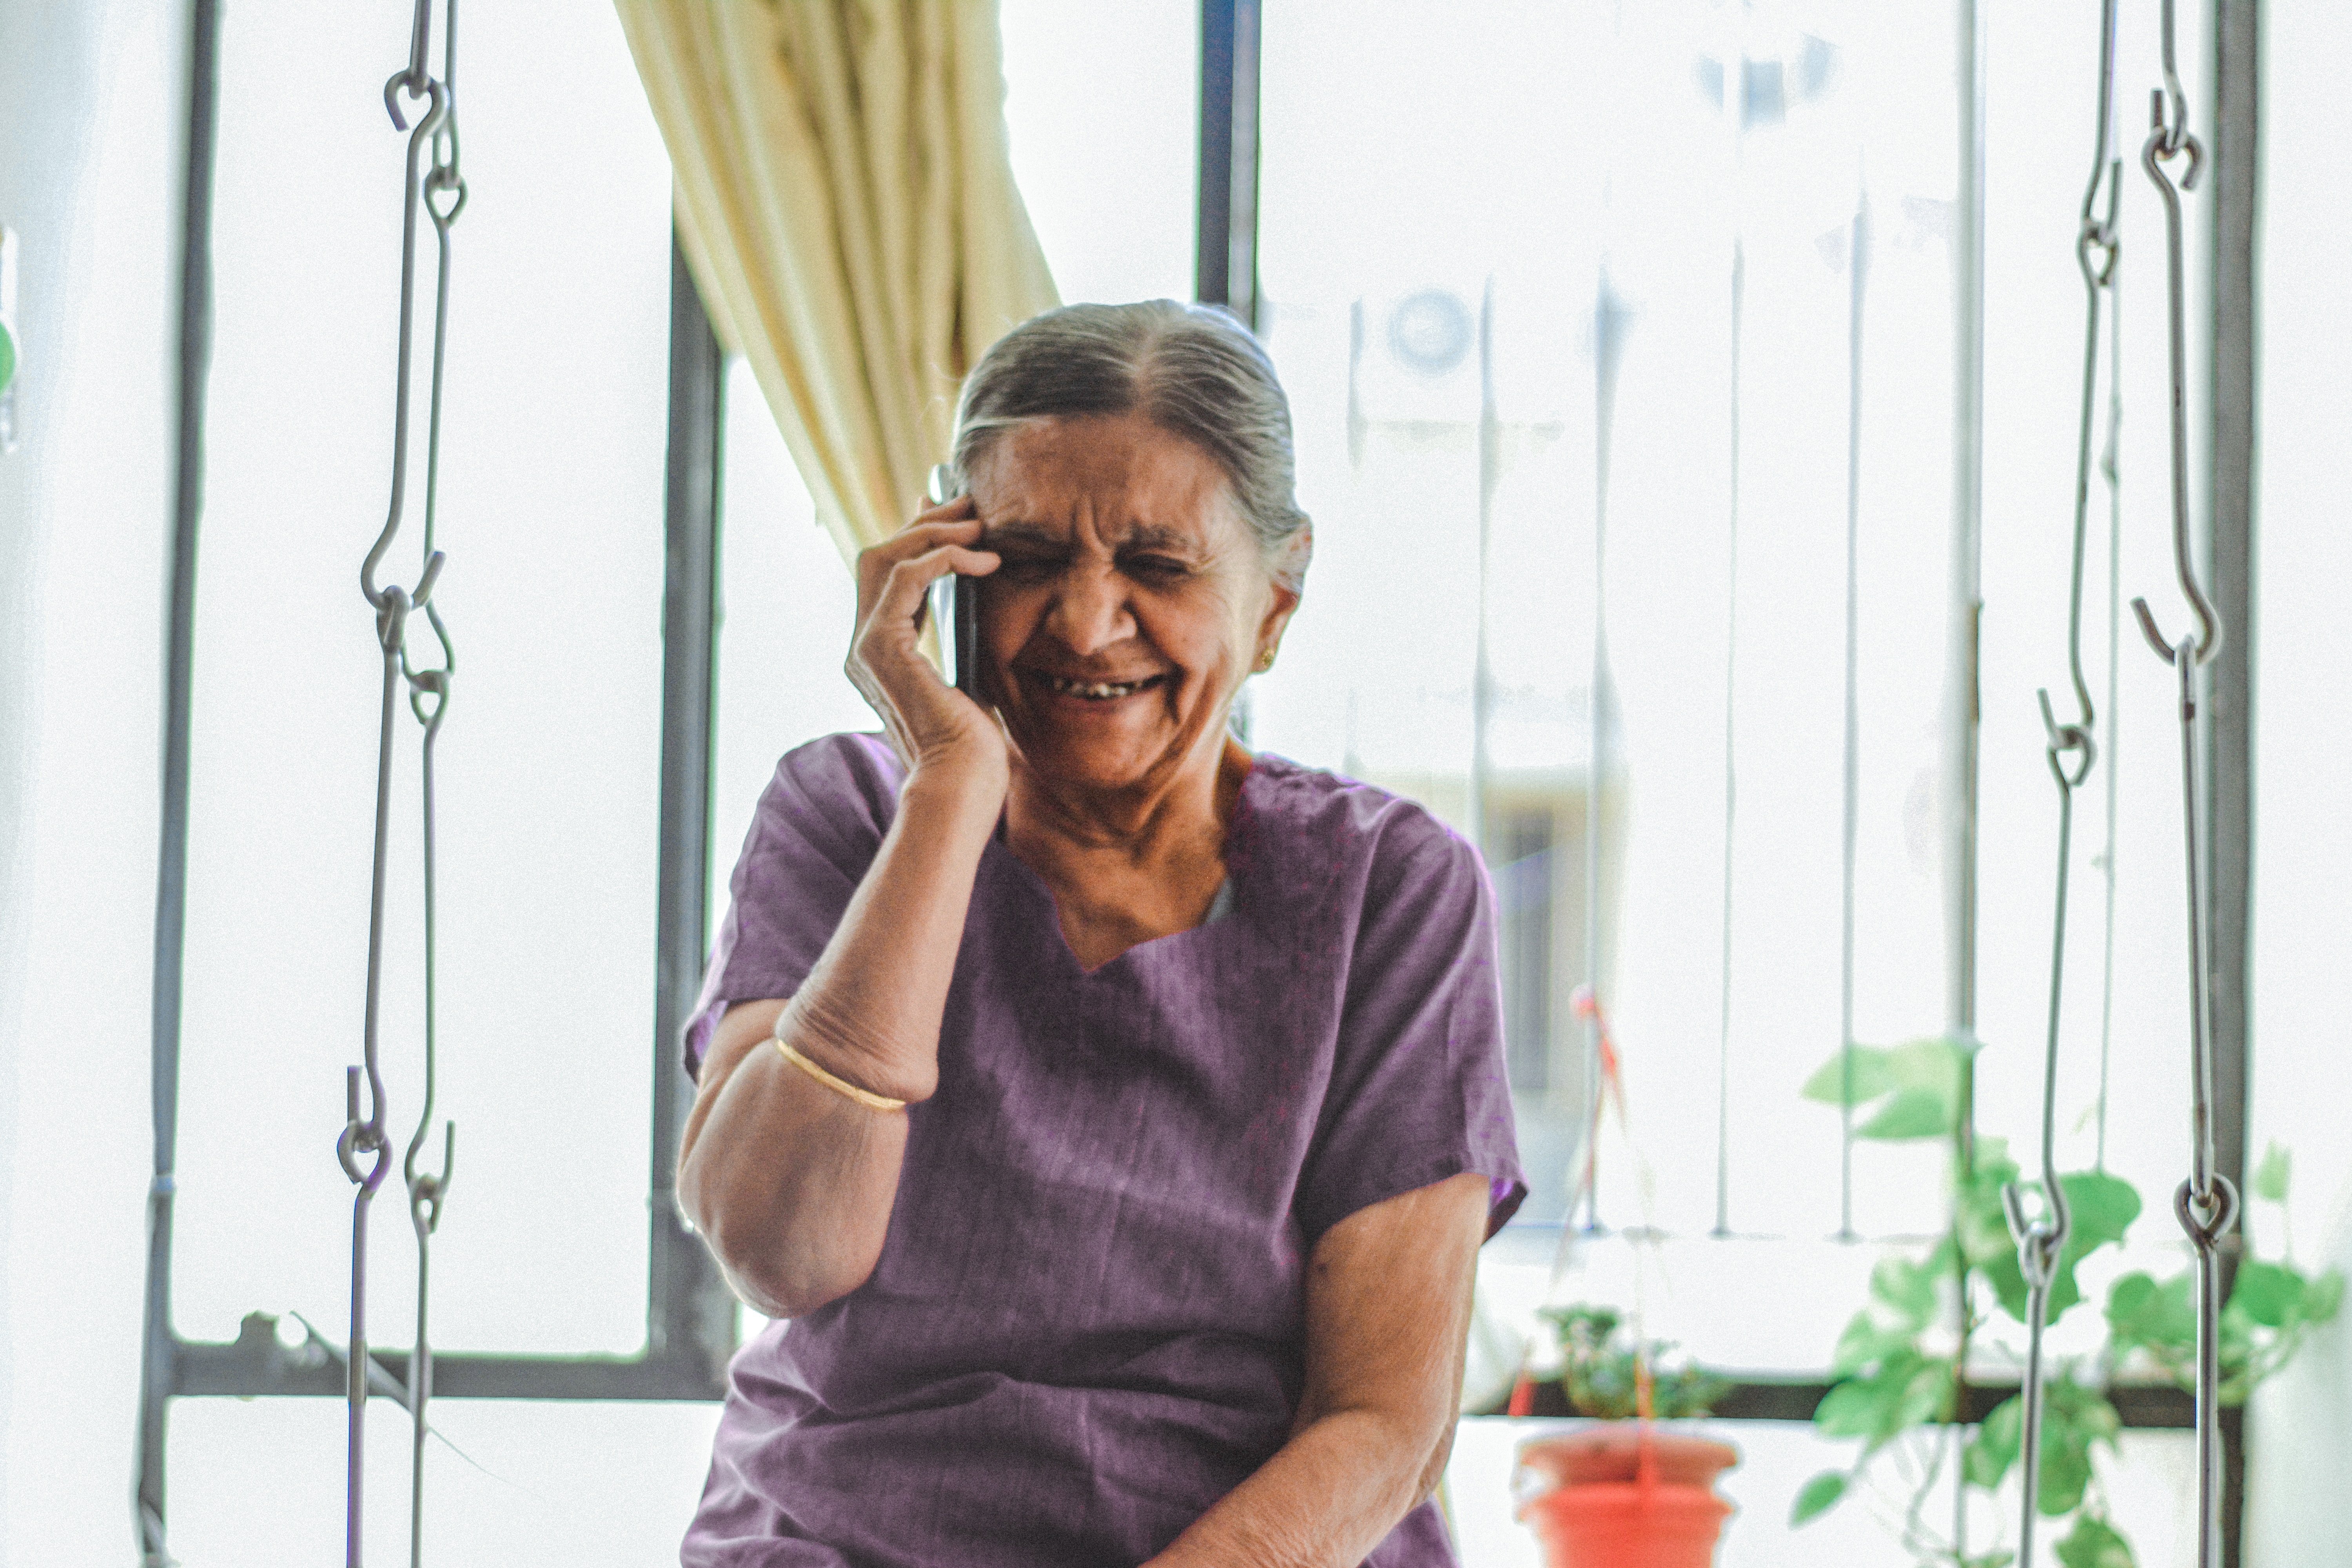 An old woman making a phone call. | Source: Unsplash